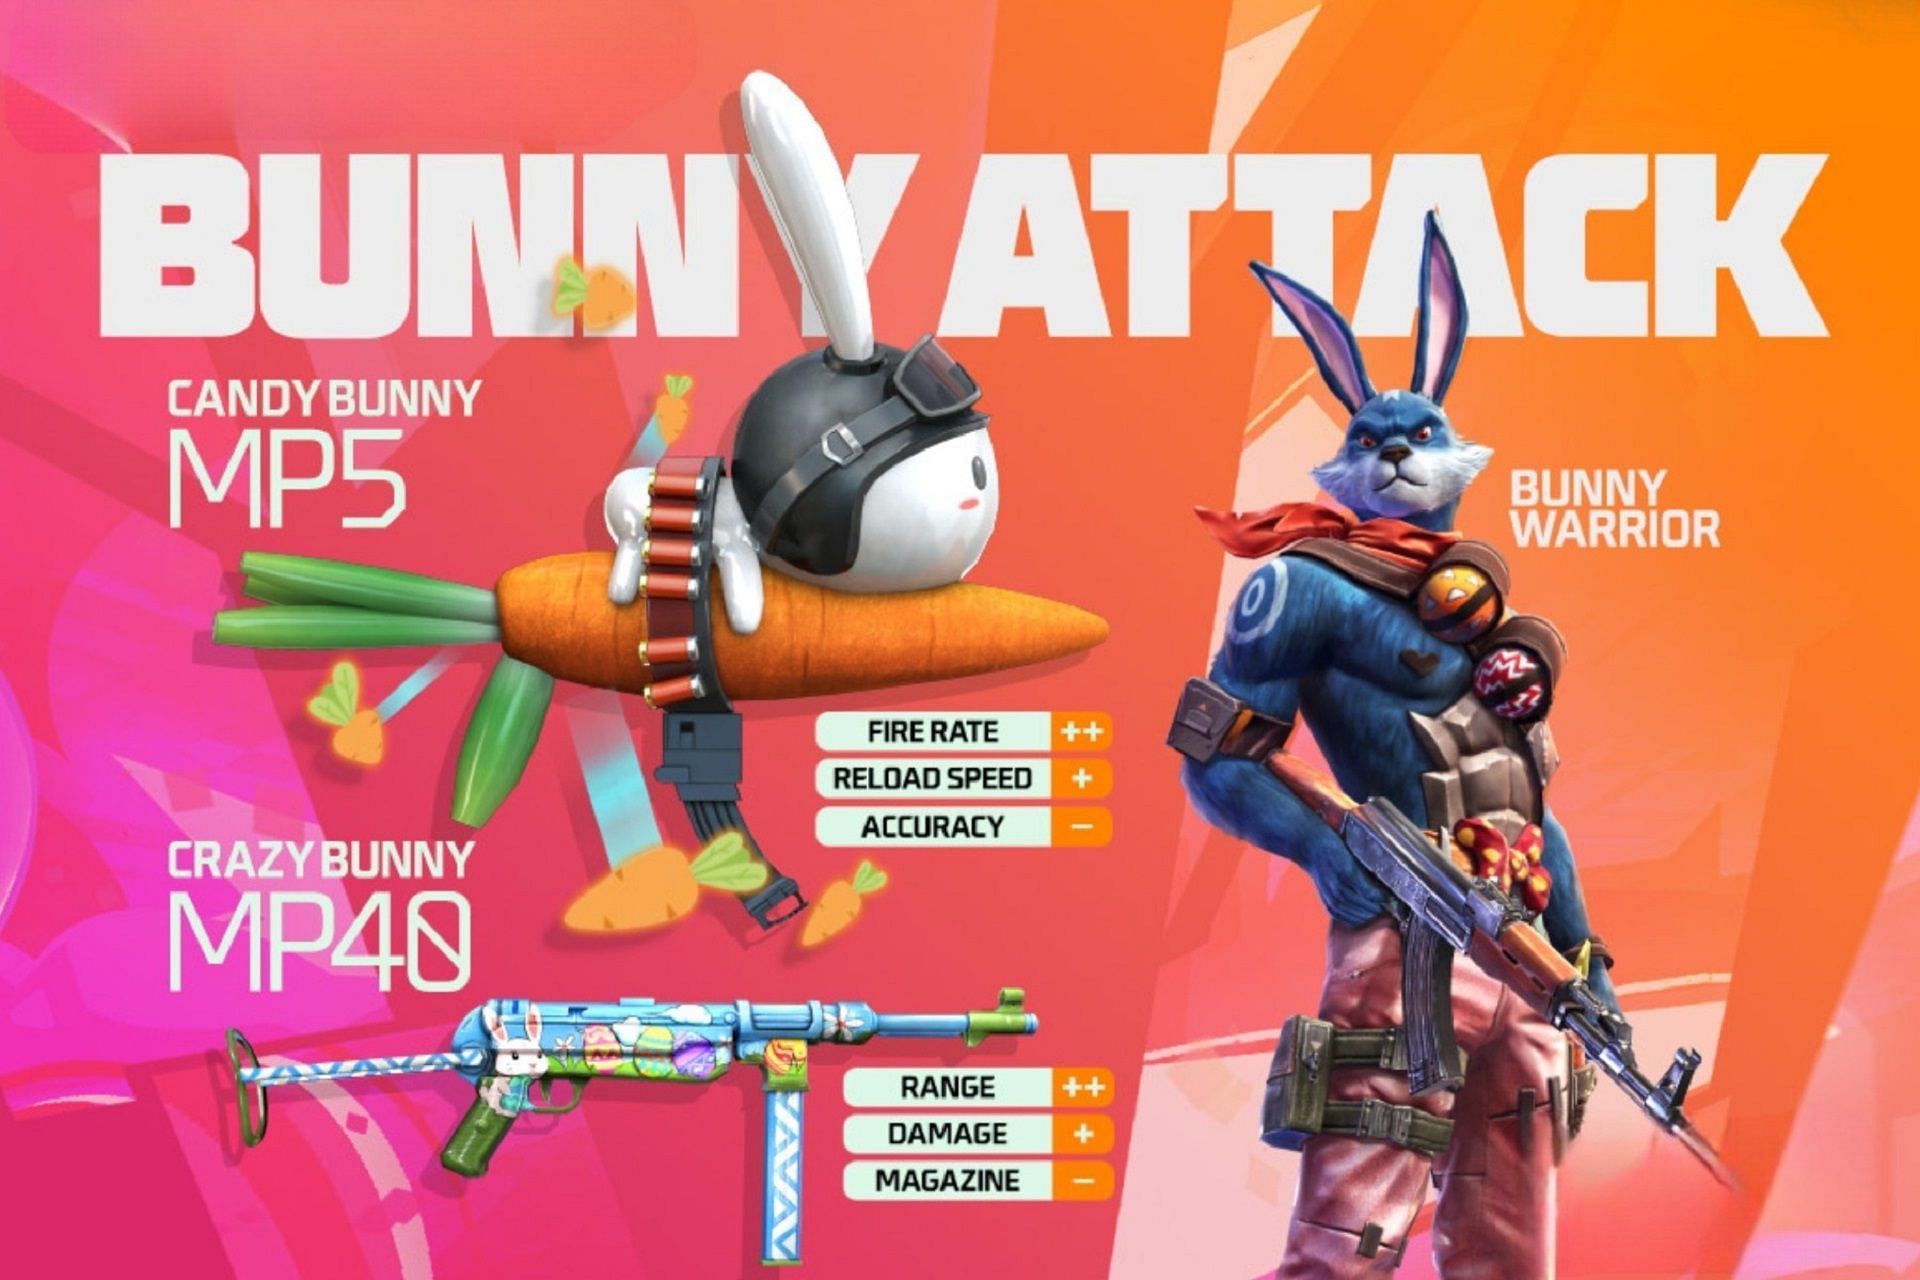 Bunny Attack event is now underway in the game (Image via Garena)